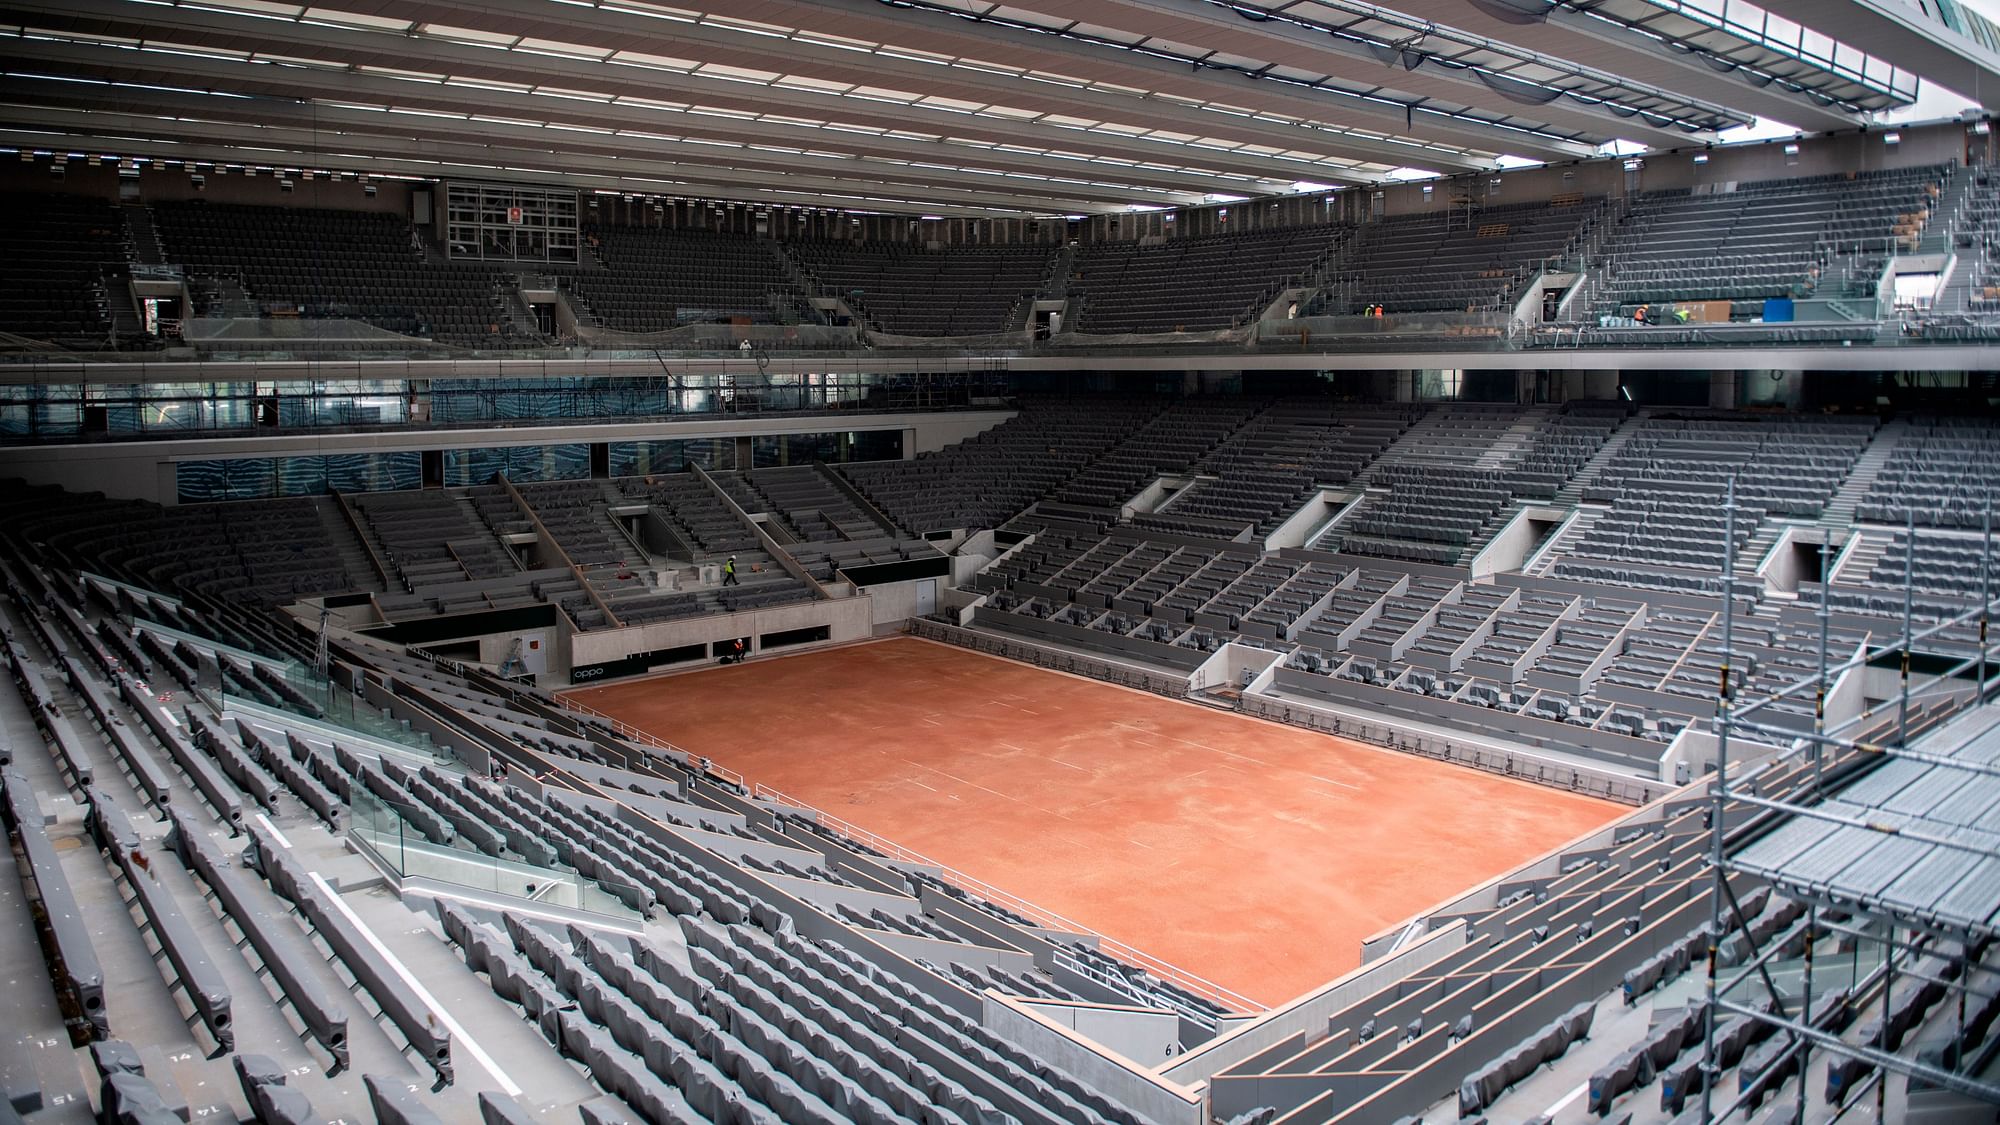 The French Open has been postponed from May to September this year.